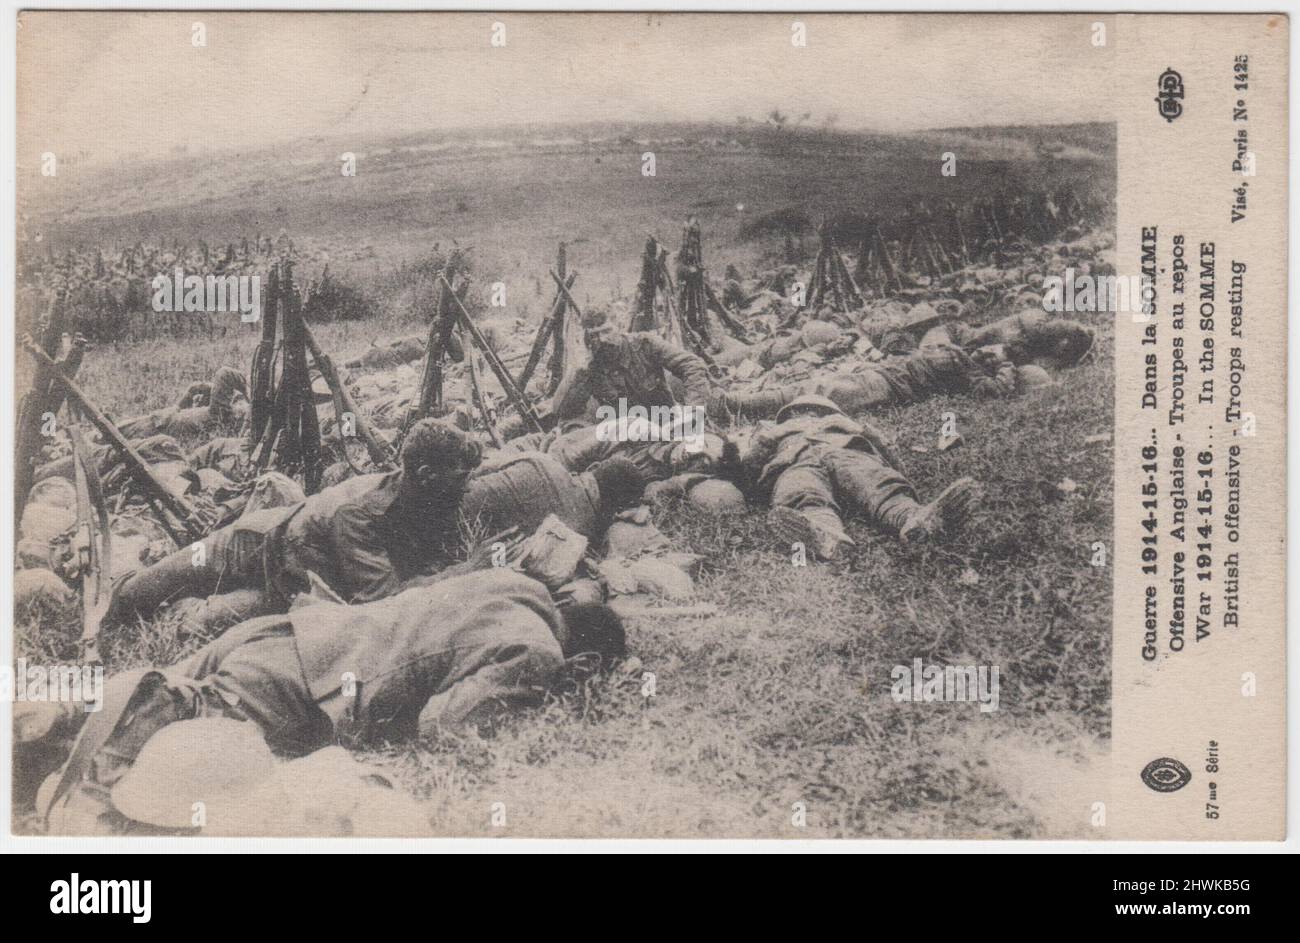 'War 1914-15-16... In the Somme. British offensive - Troops resting' / 'Guerre 1914-15-16... Dans la Somme. Offensive Anglaise - Troupes au repos'. French First World War postcard showing exhausted British soldiers on the Somme battlefield, with propped up rifles and tin helmets laid on the ground. Plumes of earth thrown up by shells can be seen on the horizon Stock Photo